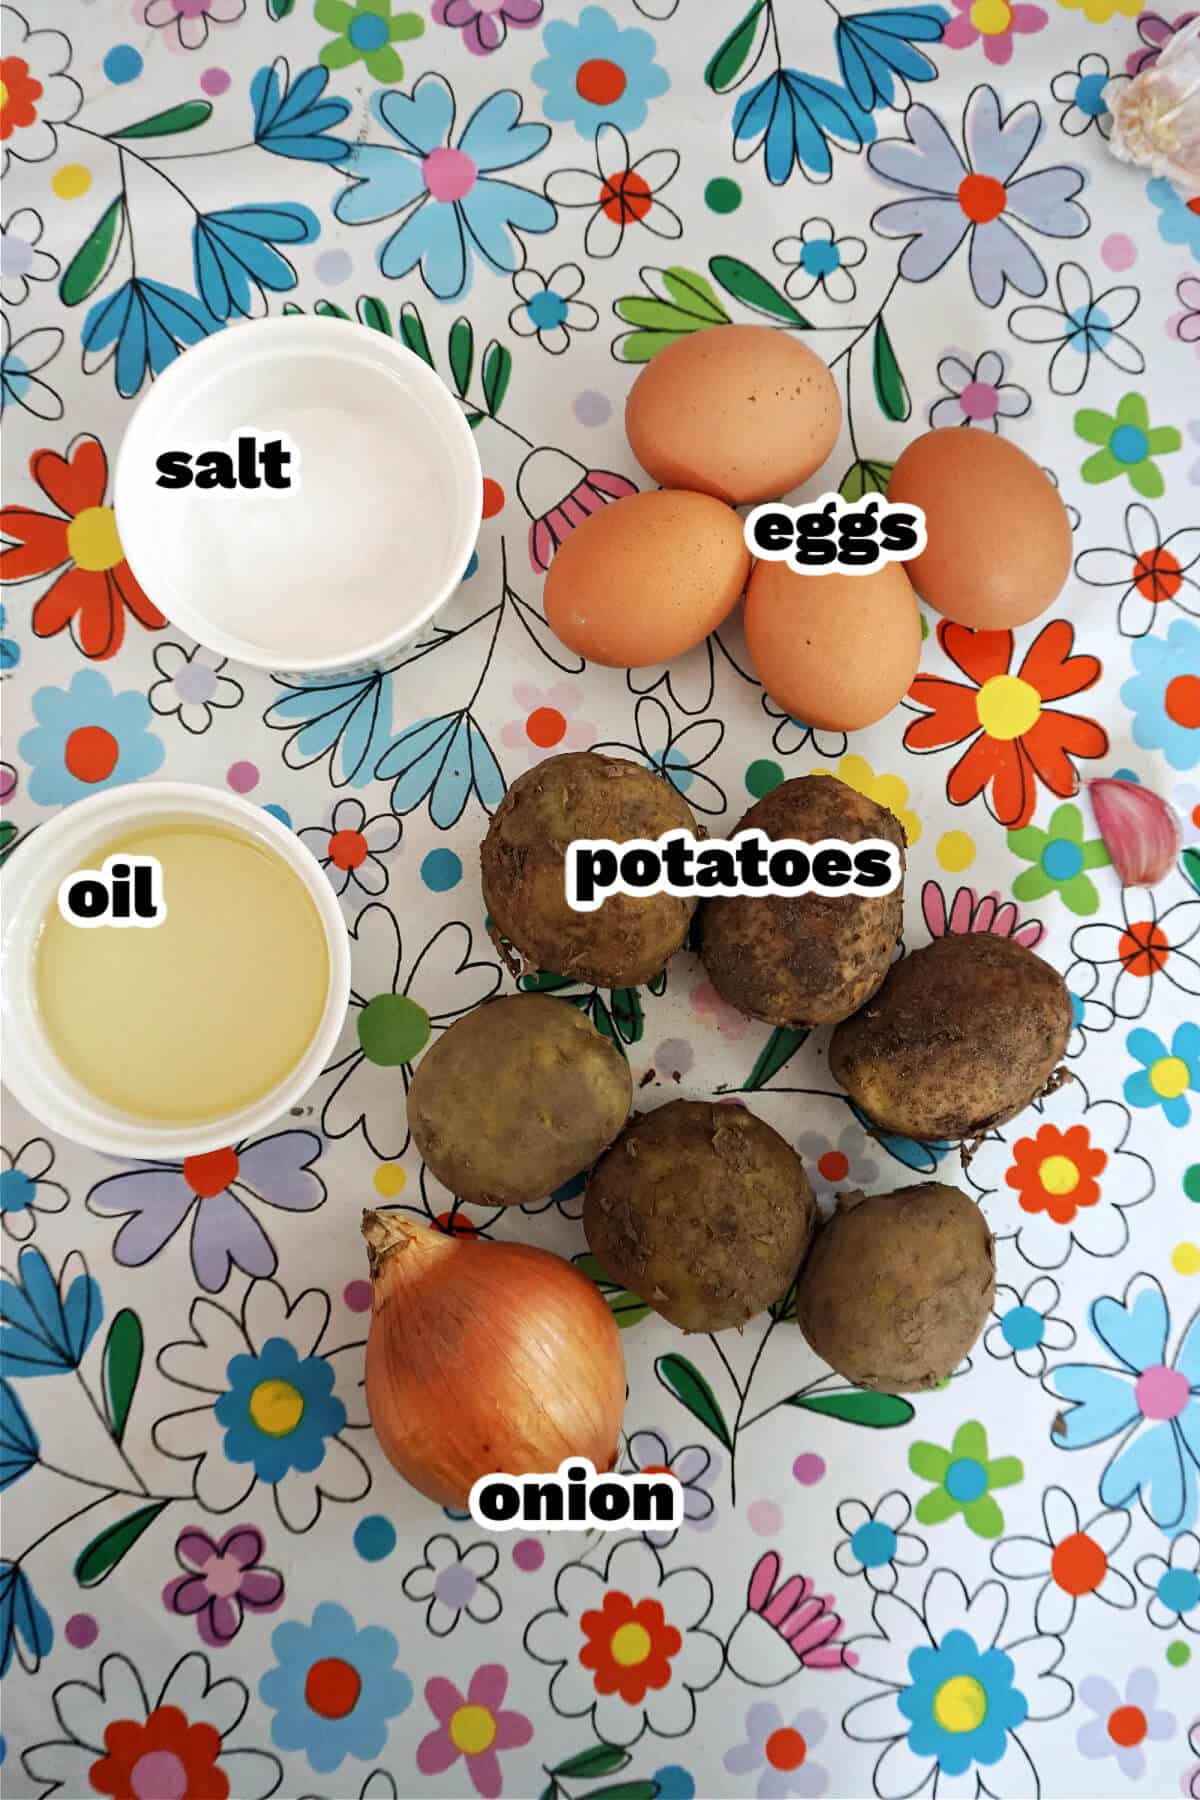 Ingredients needed to make potato omelette